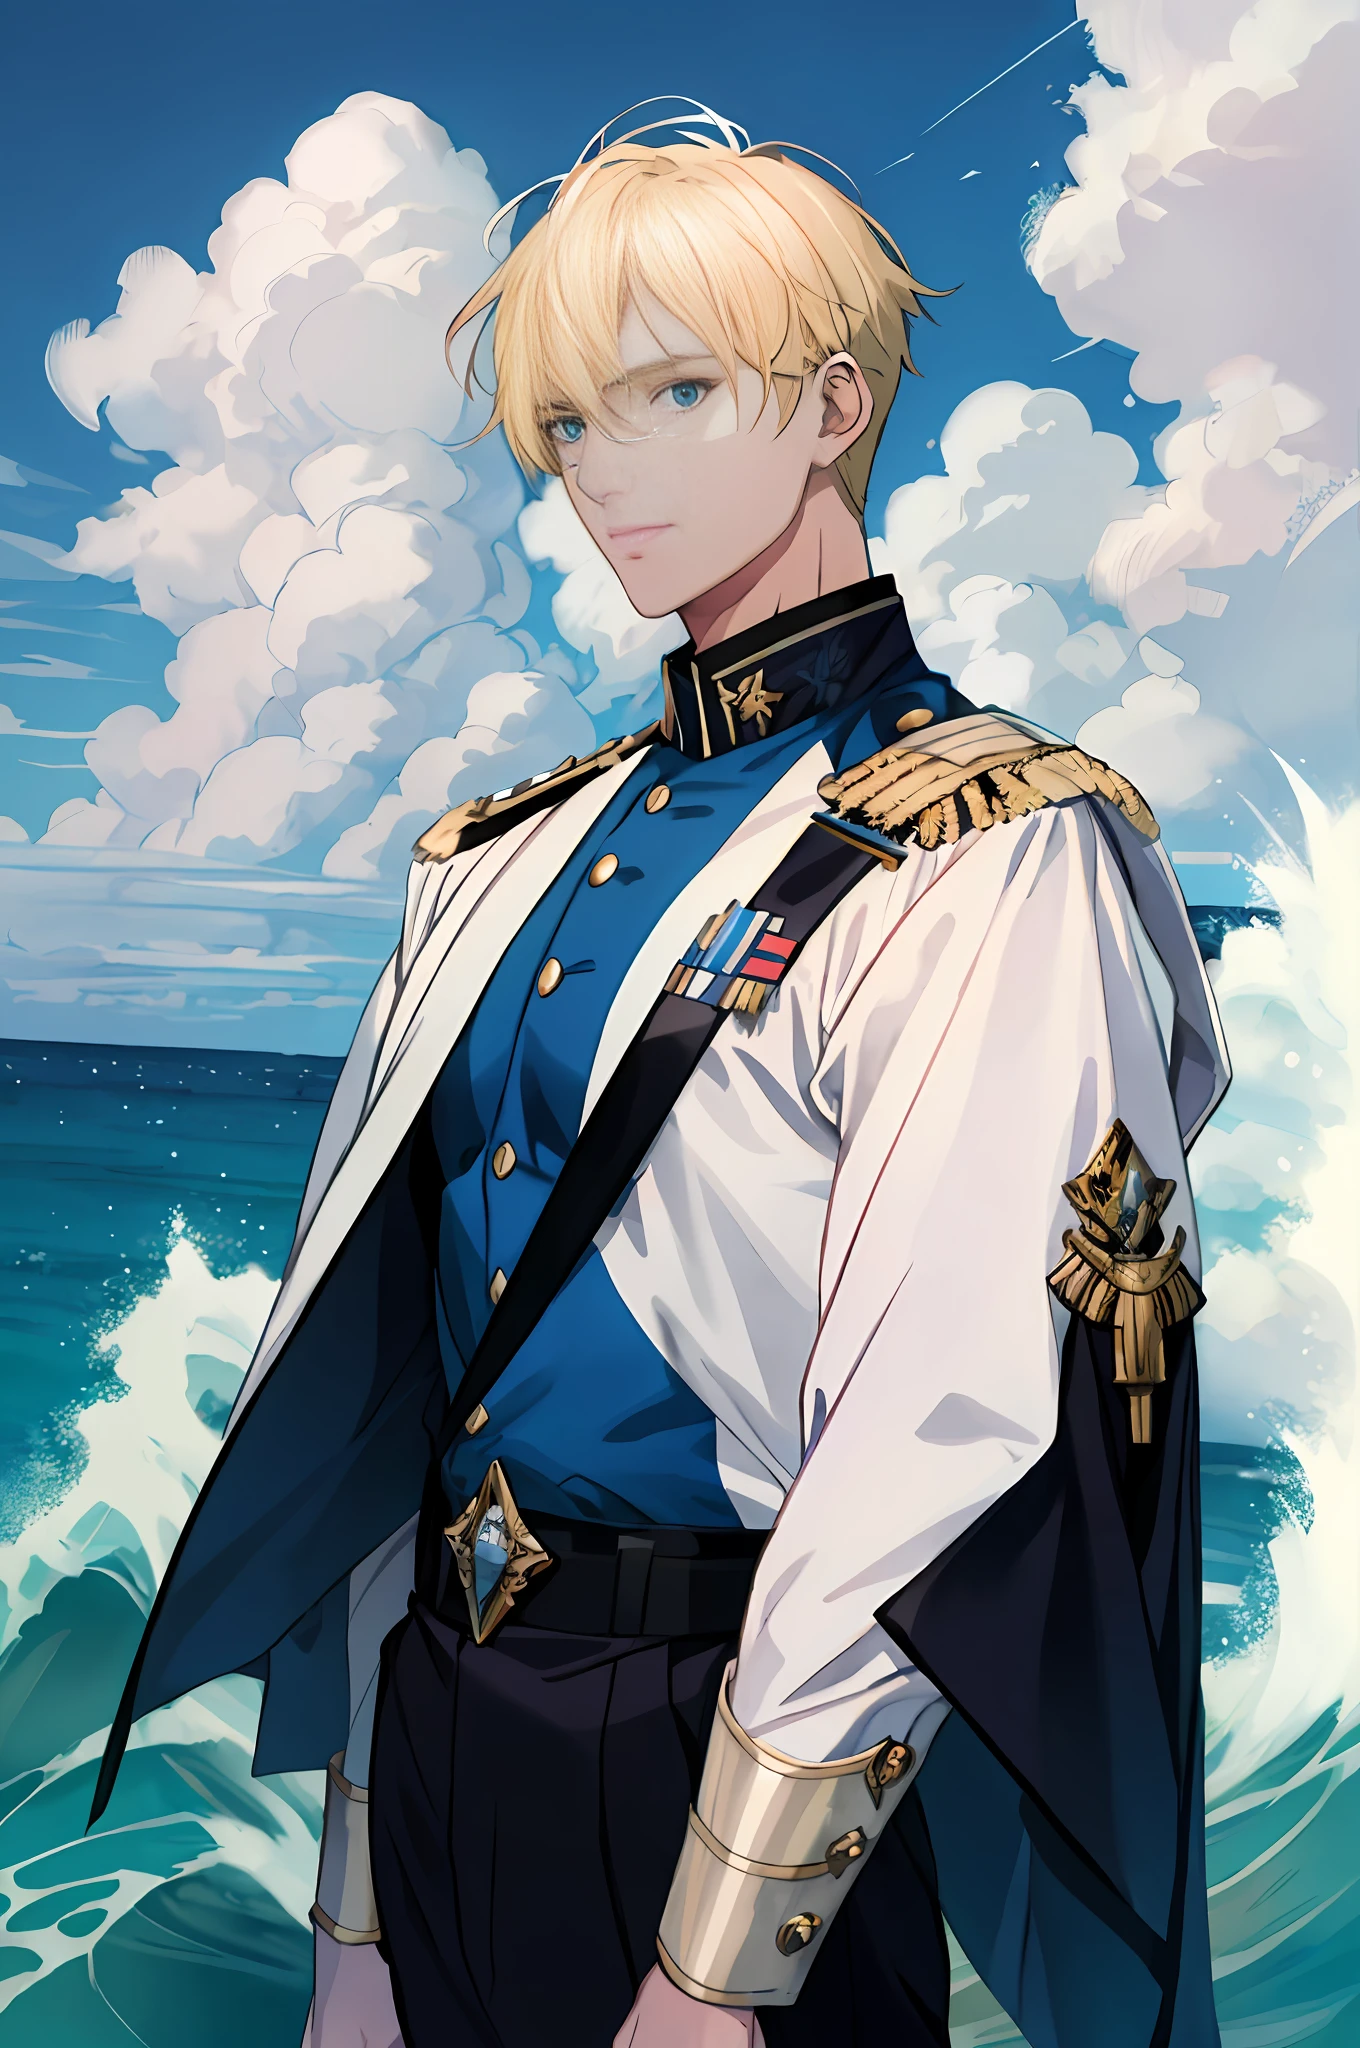 Anime - Stylistic image of a man in uniform standing in the ocean, Beautiful androgynous prince, portrait of magical blond prince, Delicate androgynous prince, highly detailed exquisite fanart, Key anime art, shigenori soejima illustration, casimir art, official character illustration, handsome guy in demon killer art, Tall anime guy with blue eyes, official fanart